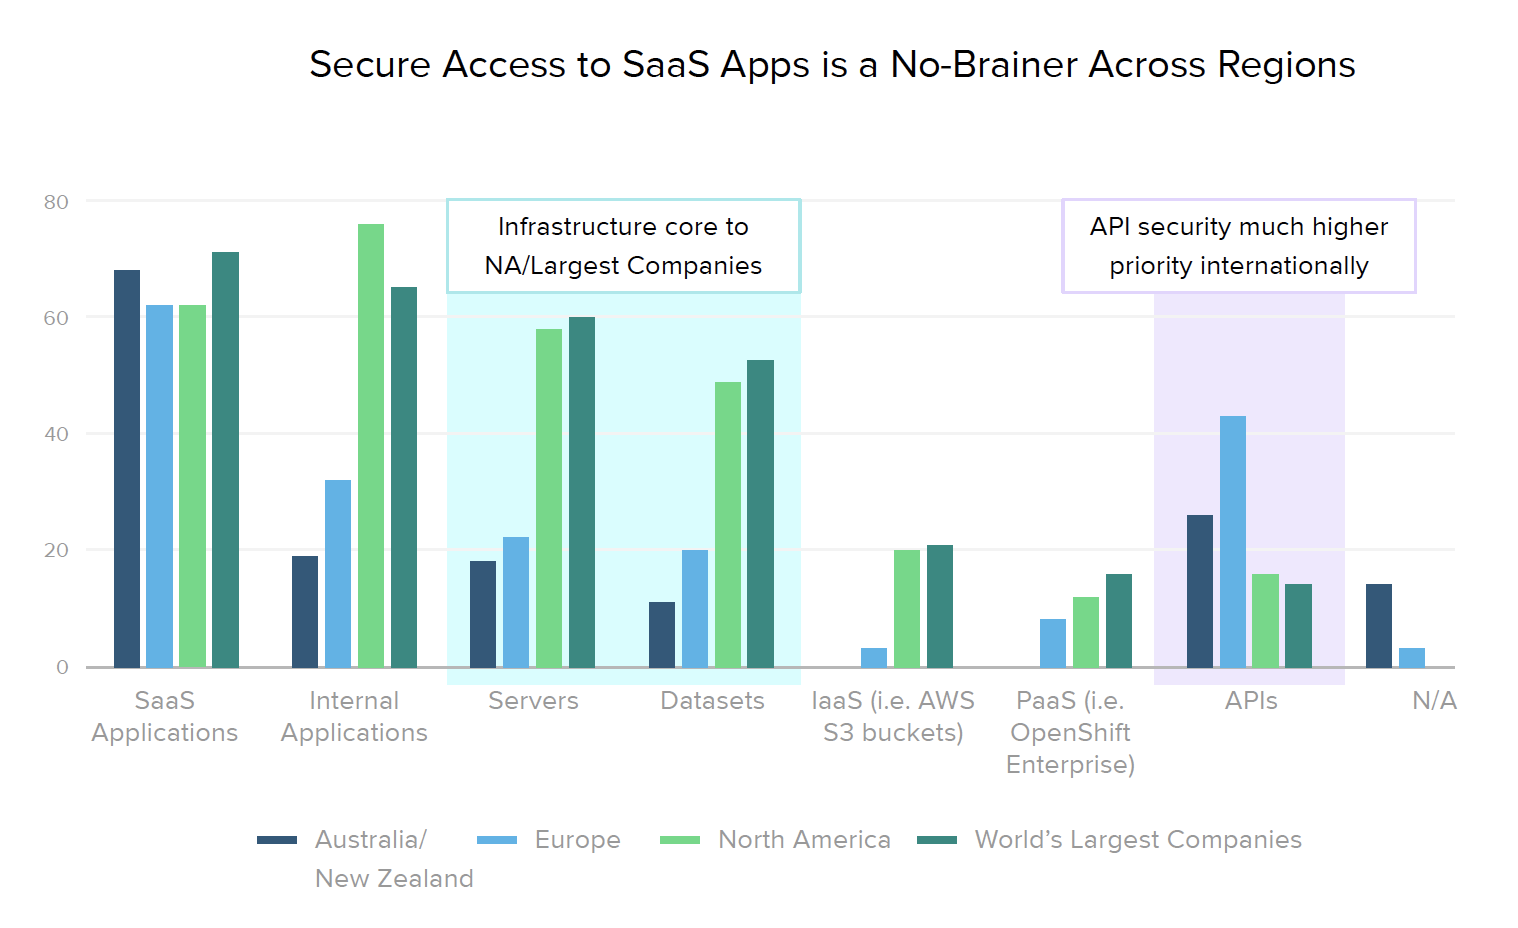 Secure Access to SaaS Apps is a No-Brainer Across Regions